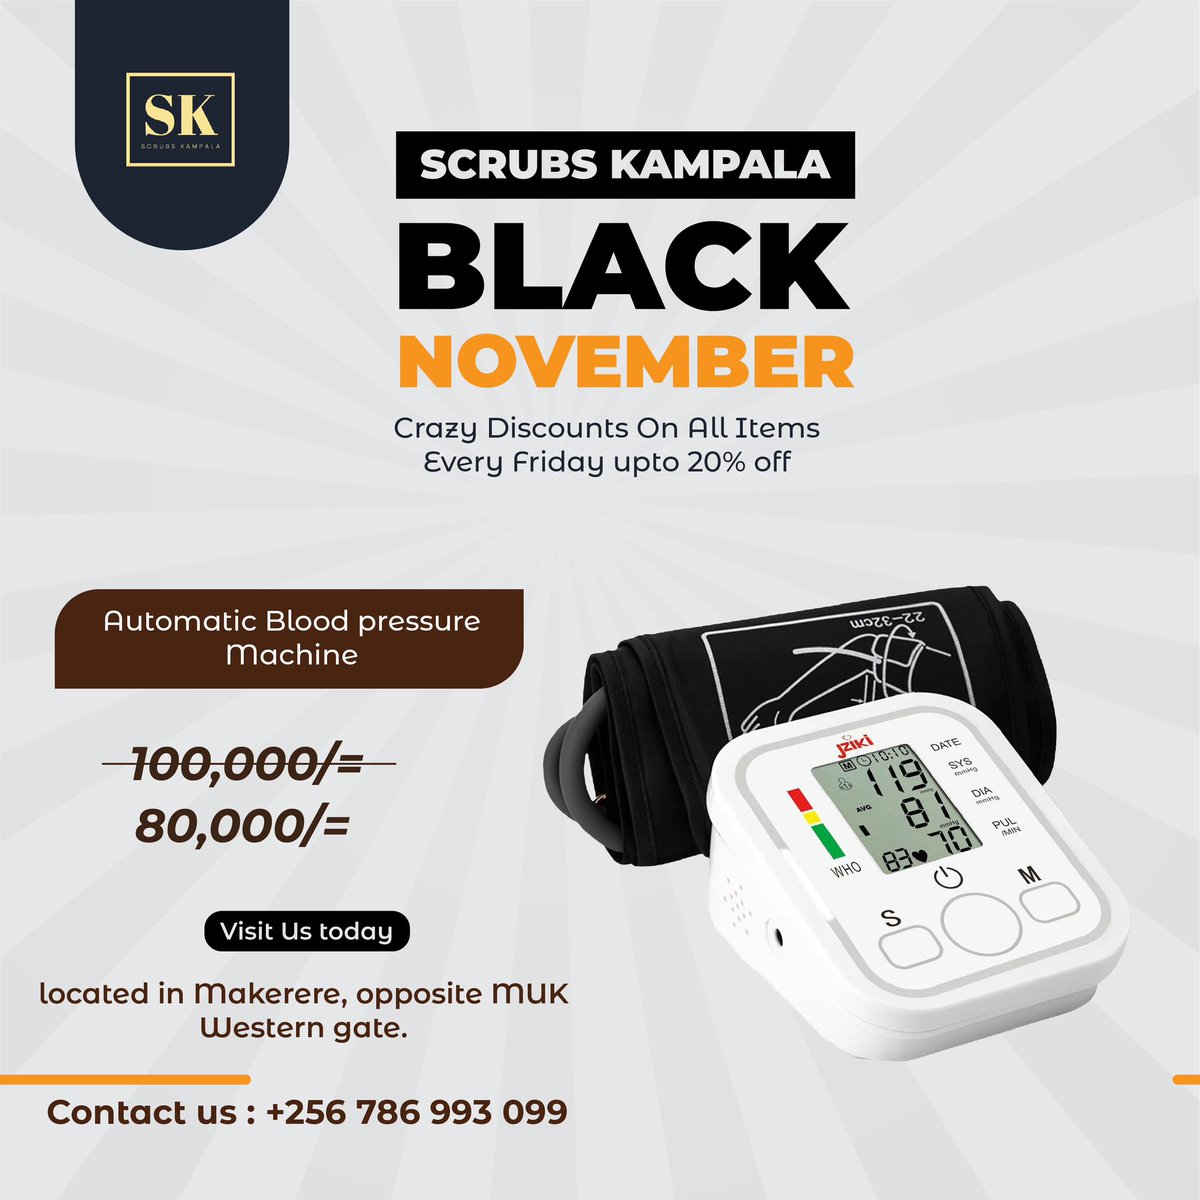 🎉Black Friday Deals are here 🏷️

First items today 😊⚫️🎉 
1. Blood sugar monitoring machine - Glucometer at 65,000 UGX (Comes with 50 testing strips and prickers)

2. Automatic blood pressure monitoring machine at 80,000 UGX

Place your orders via 0786993099 (WhatsApp or Call)